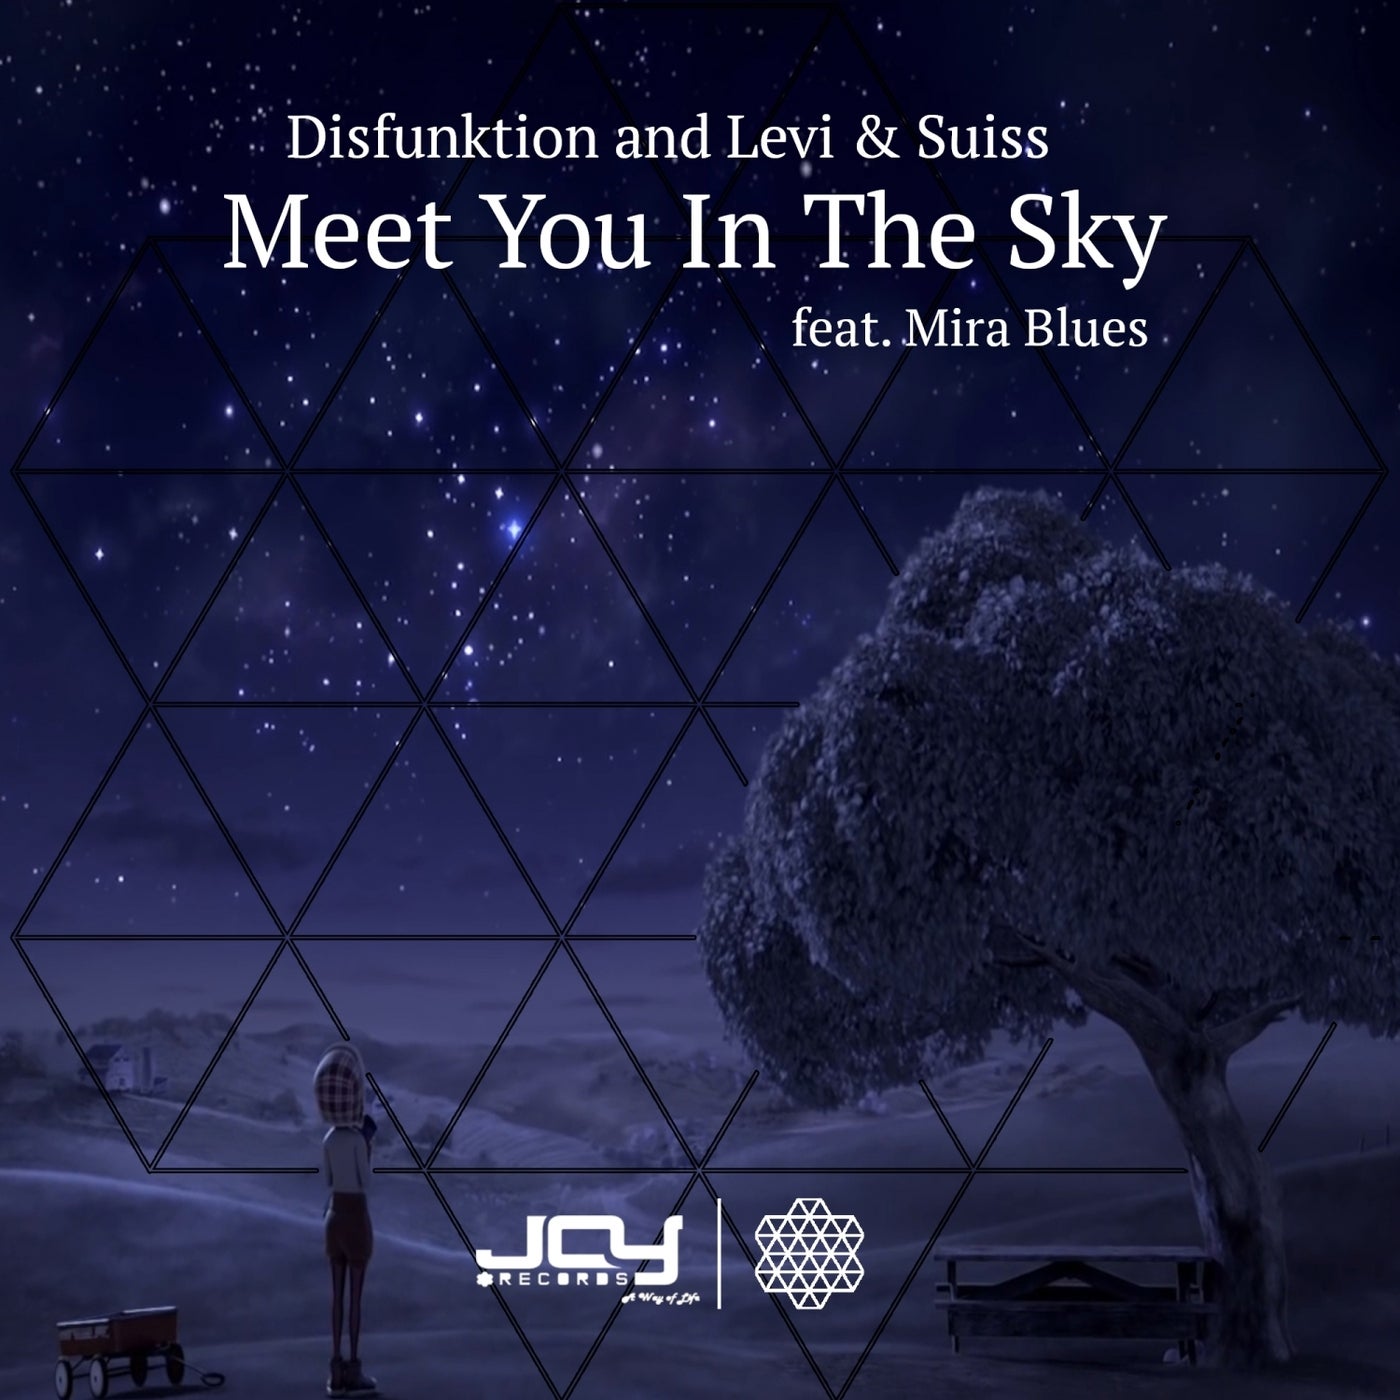 Meet You in the Sky feat. Mira Blues